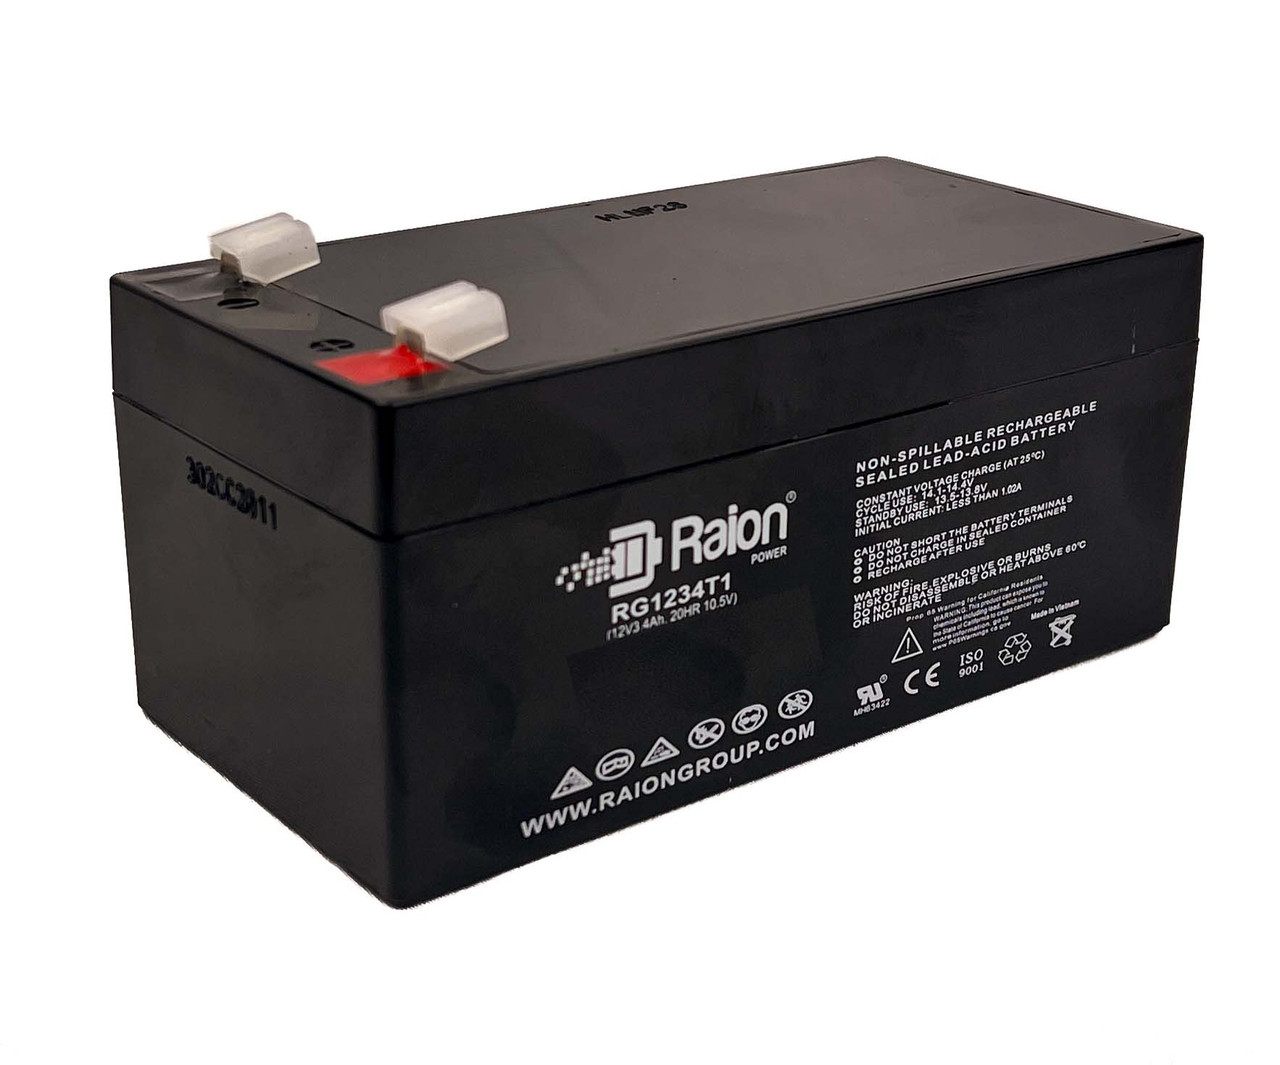 Raion Power 12V 3.4Ah Non-Spillable Replacement Battery for Neptune NT1234